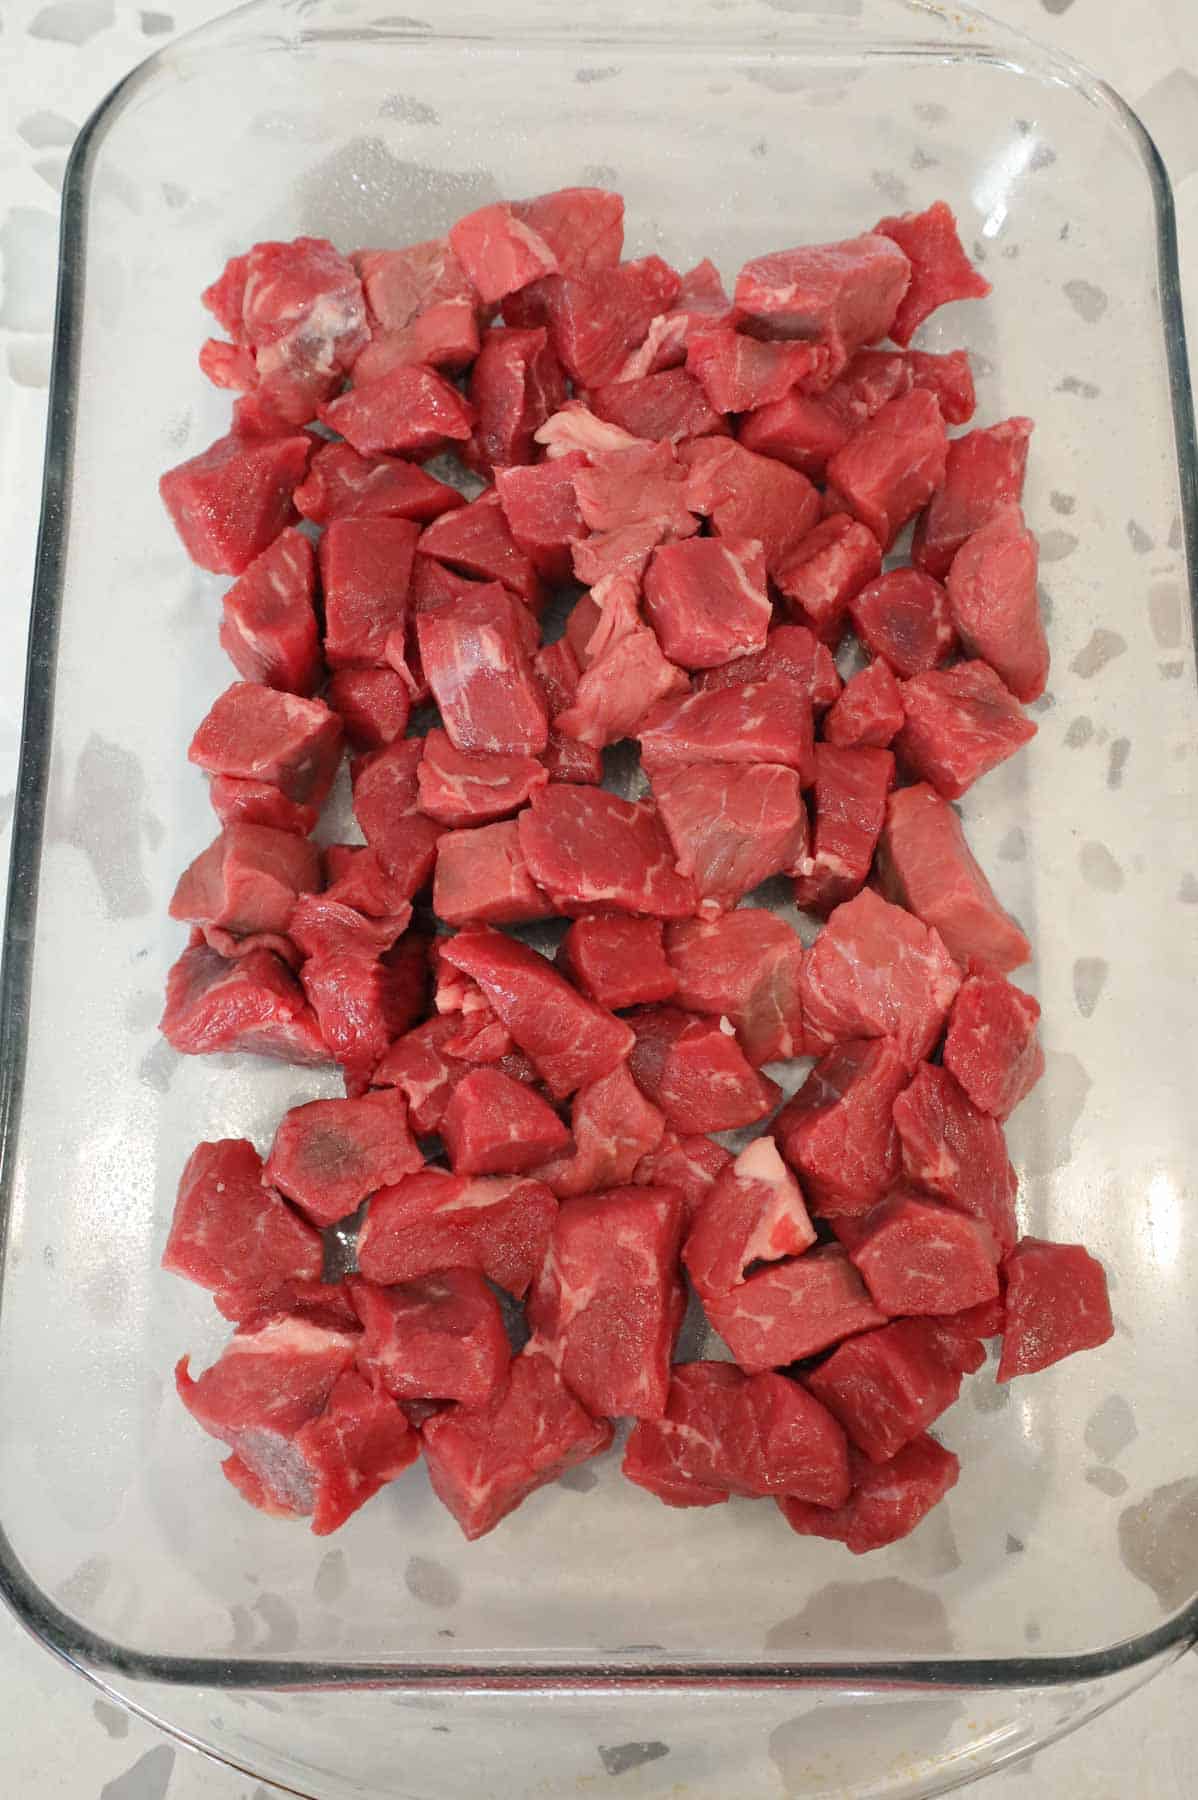 cubed stewing beef in a baking dish